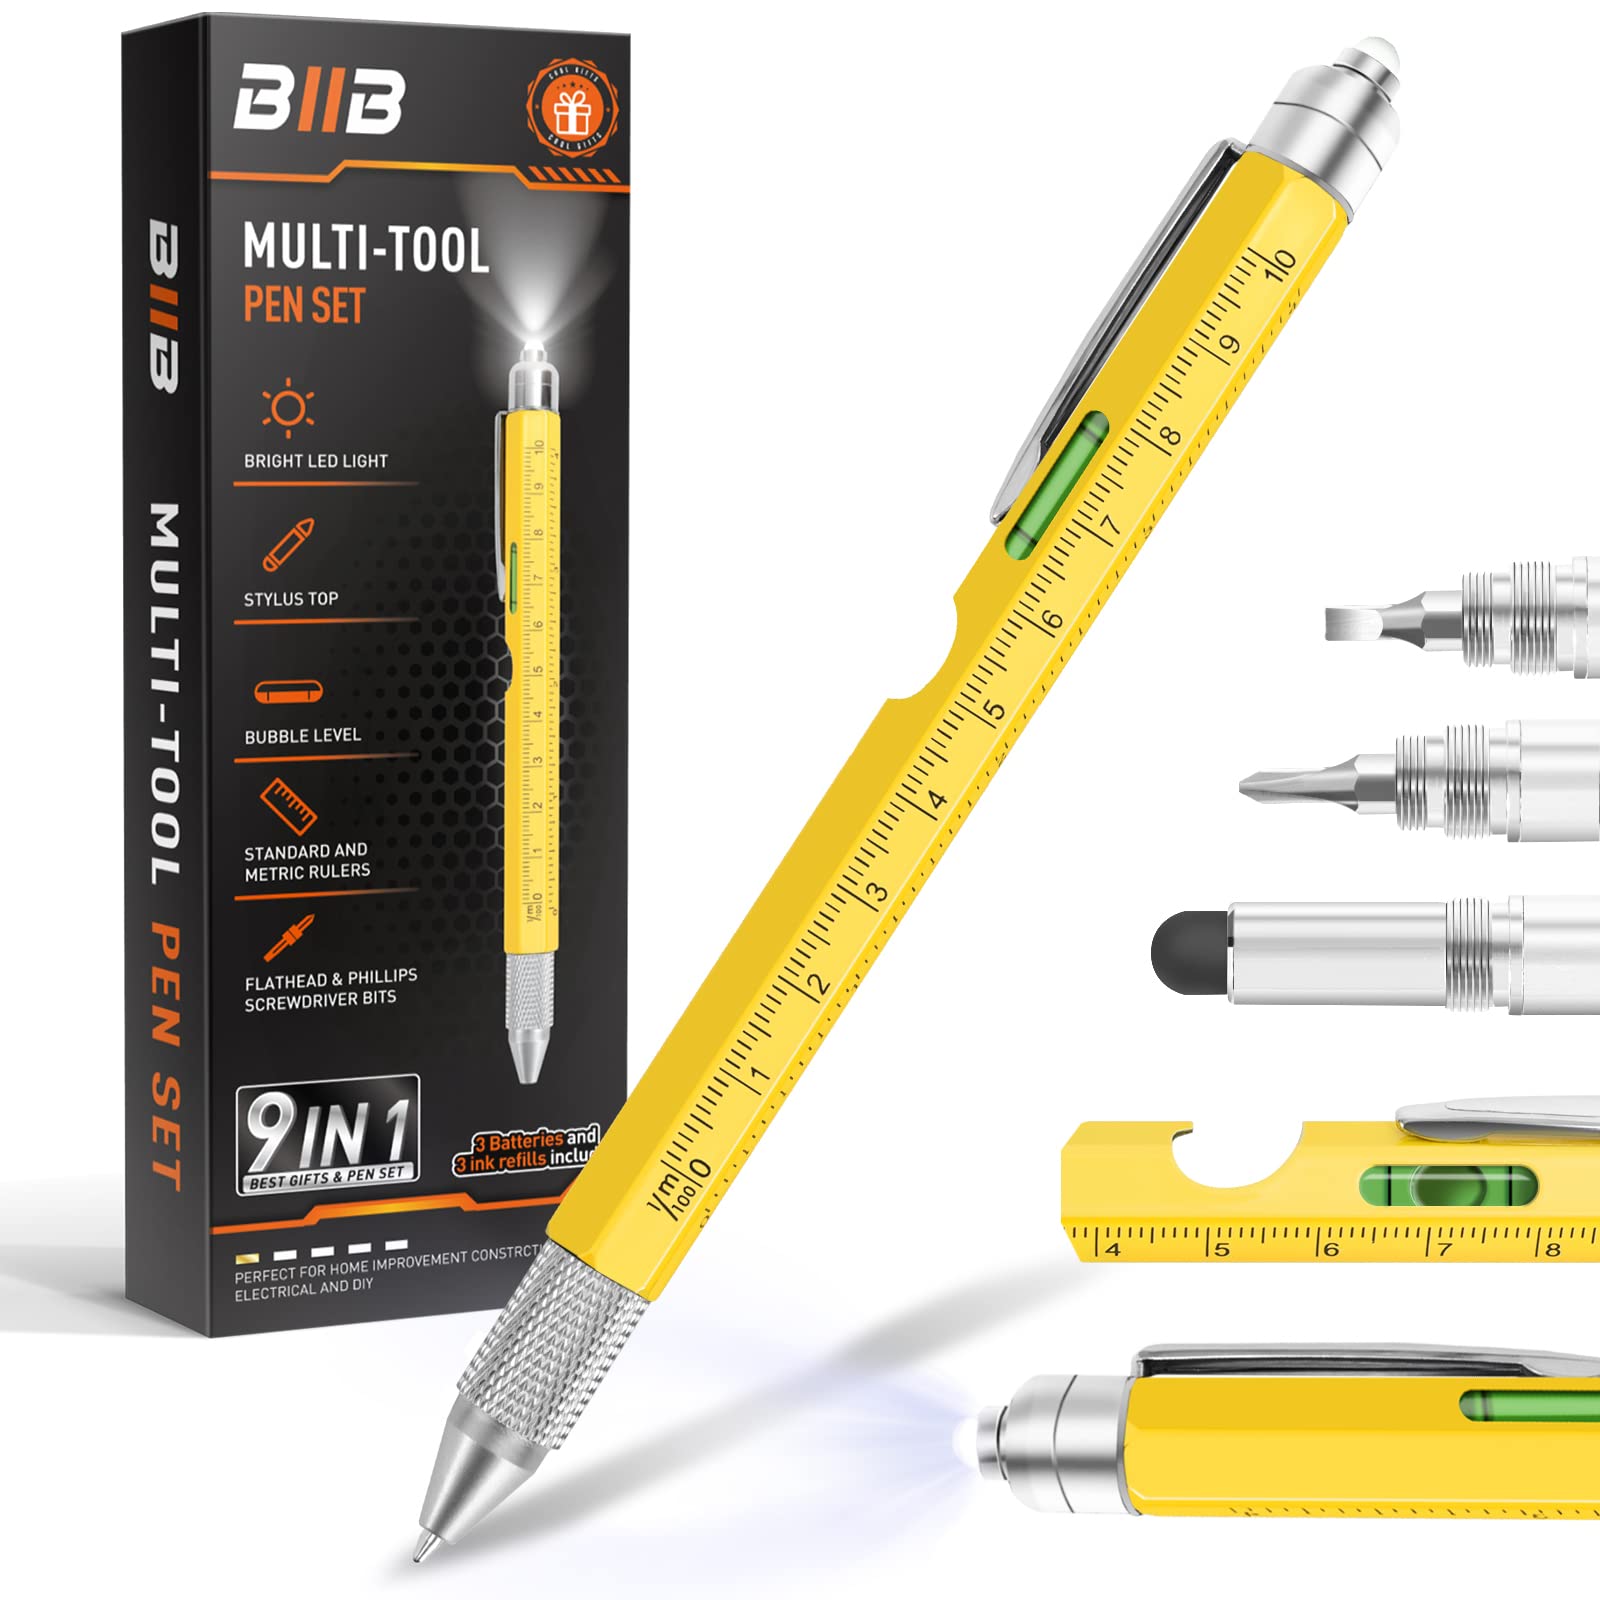 BIIB Gifts for Men, Stocking Stuffers for Men 9 in 1 Multitool Pen,  Christmas Gifts for Men Who Have Everything, Cool Gadgets for Men, Birthday  Gifts for Dad, Husband, Grandpa, Dad Gifts